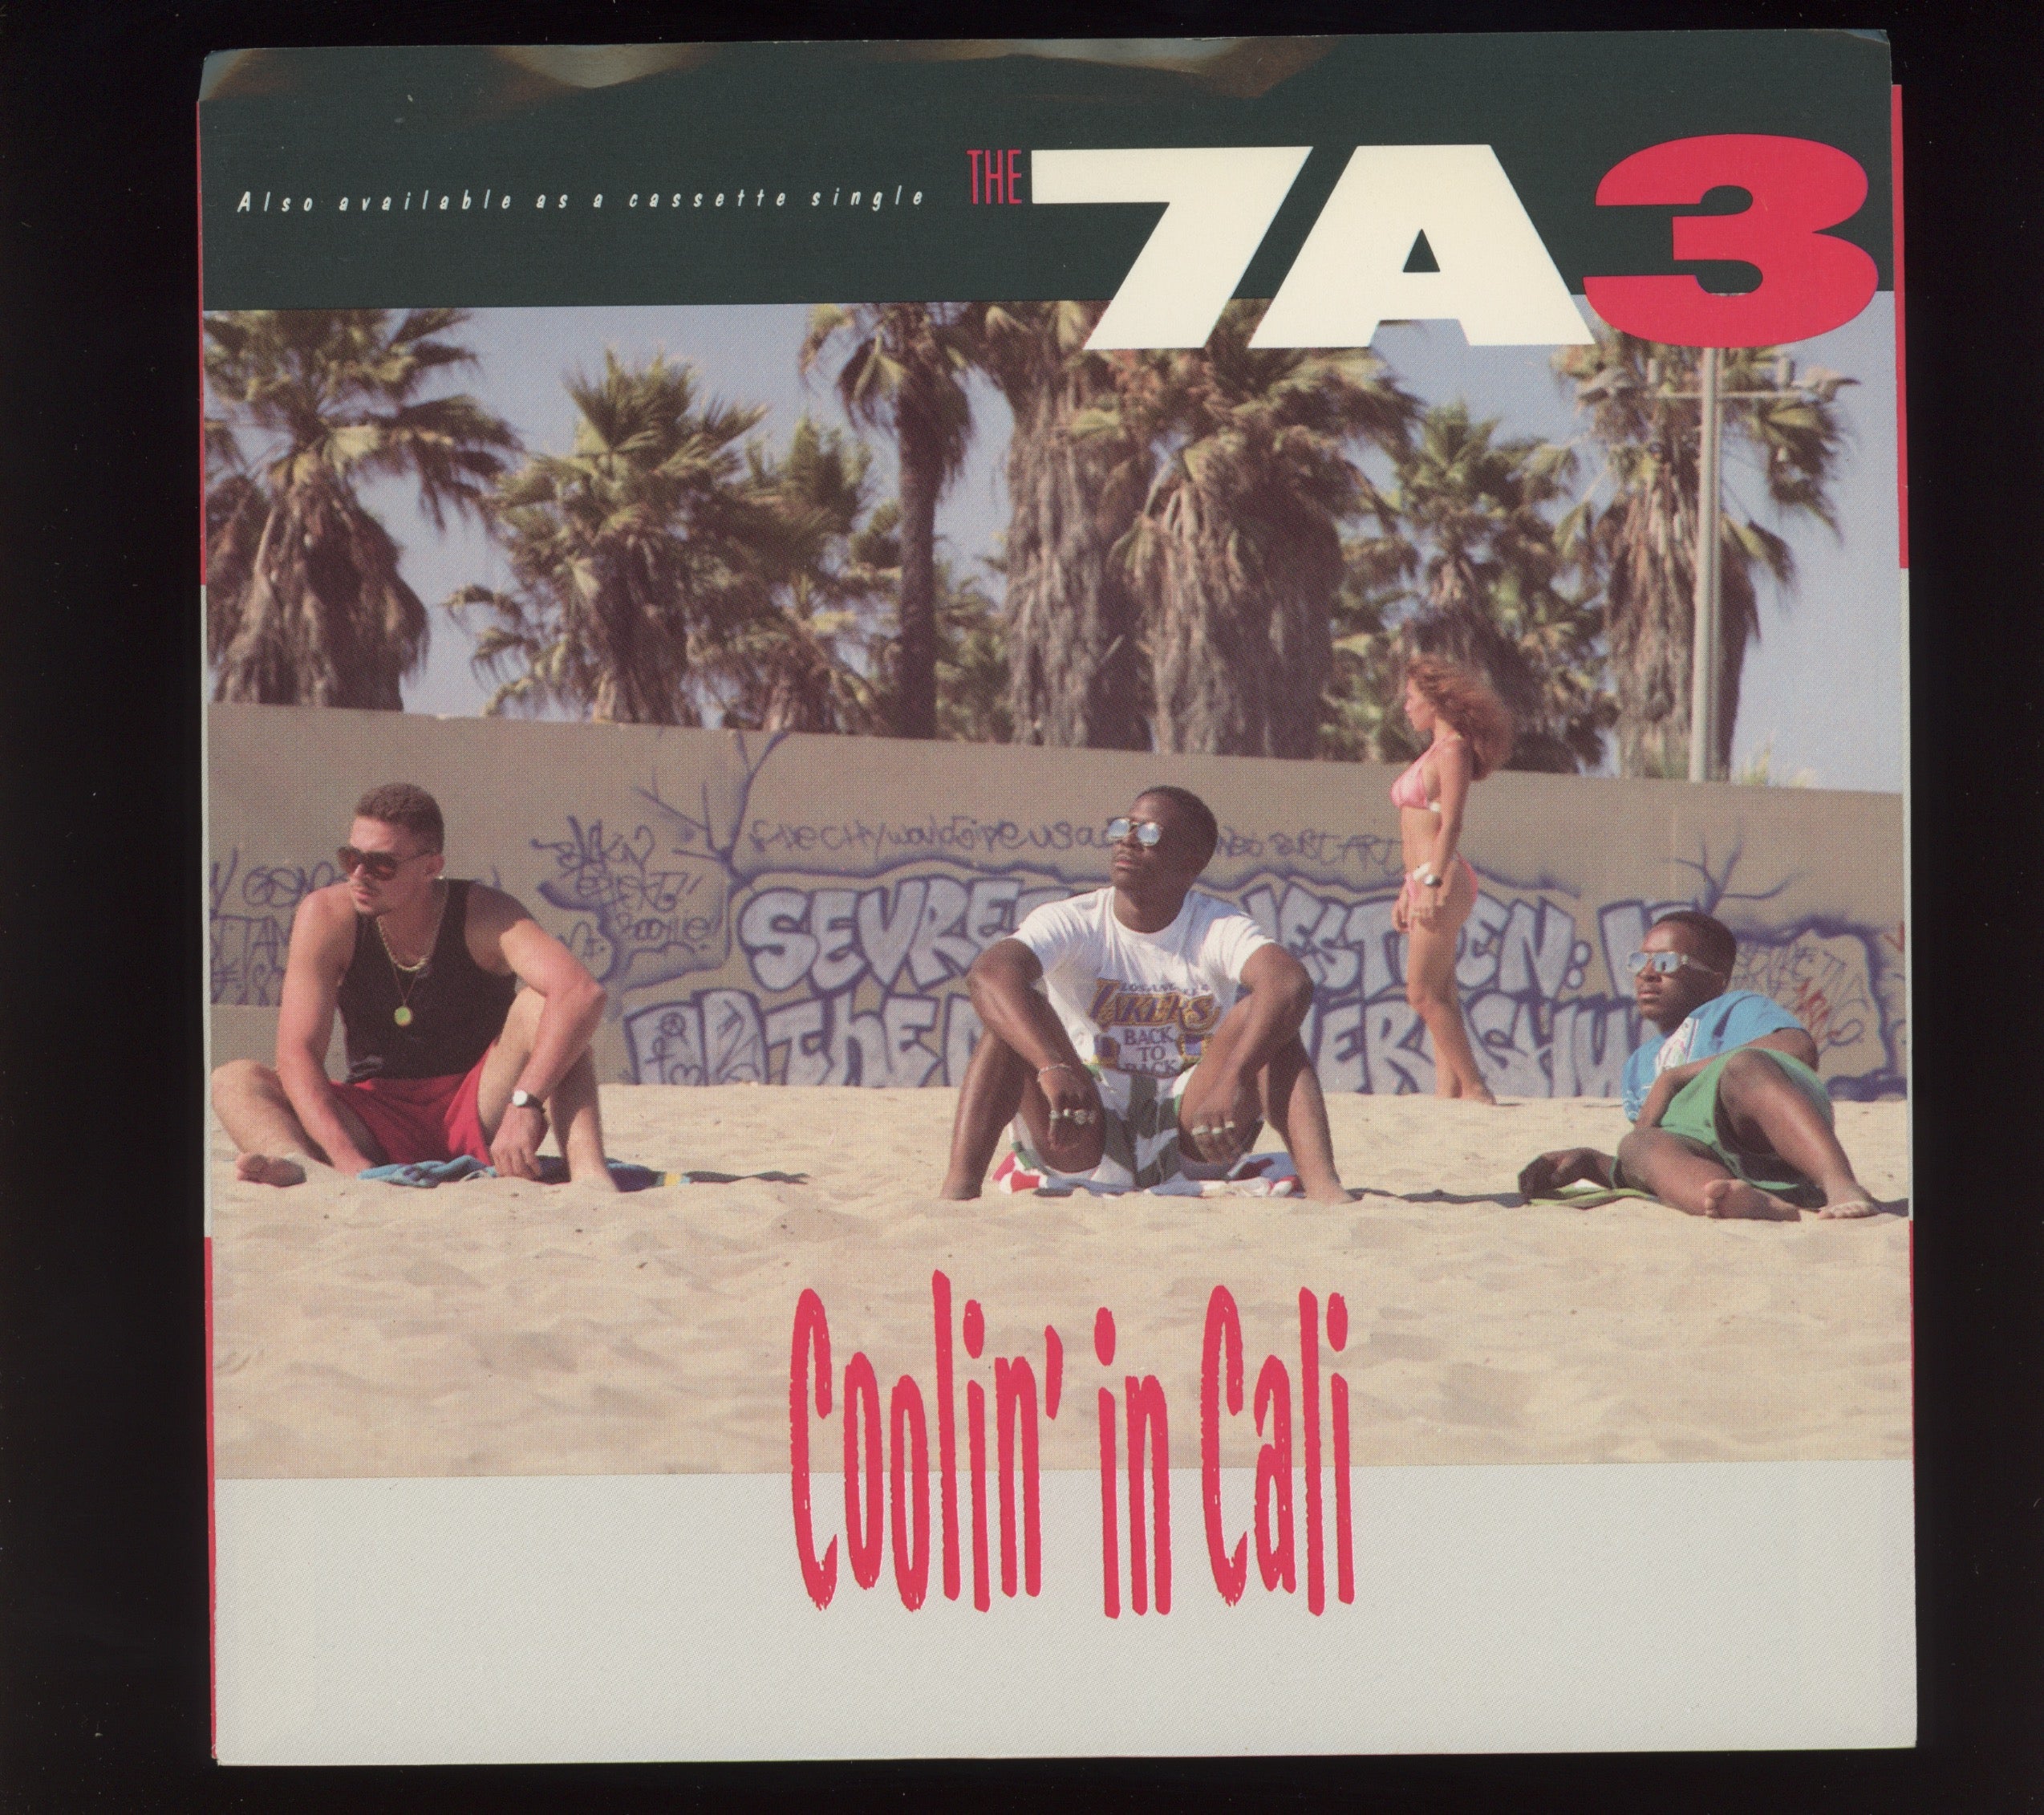 7A3 - Coolin' In Cali on Geffen With Picture Sleeve